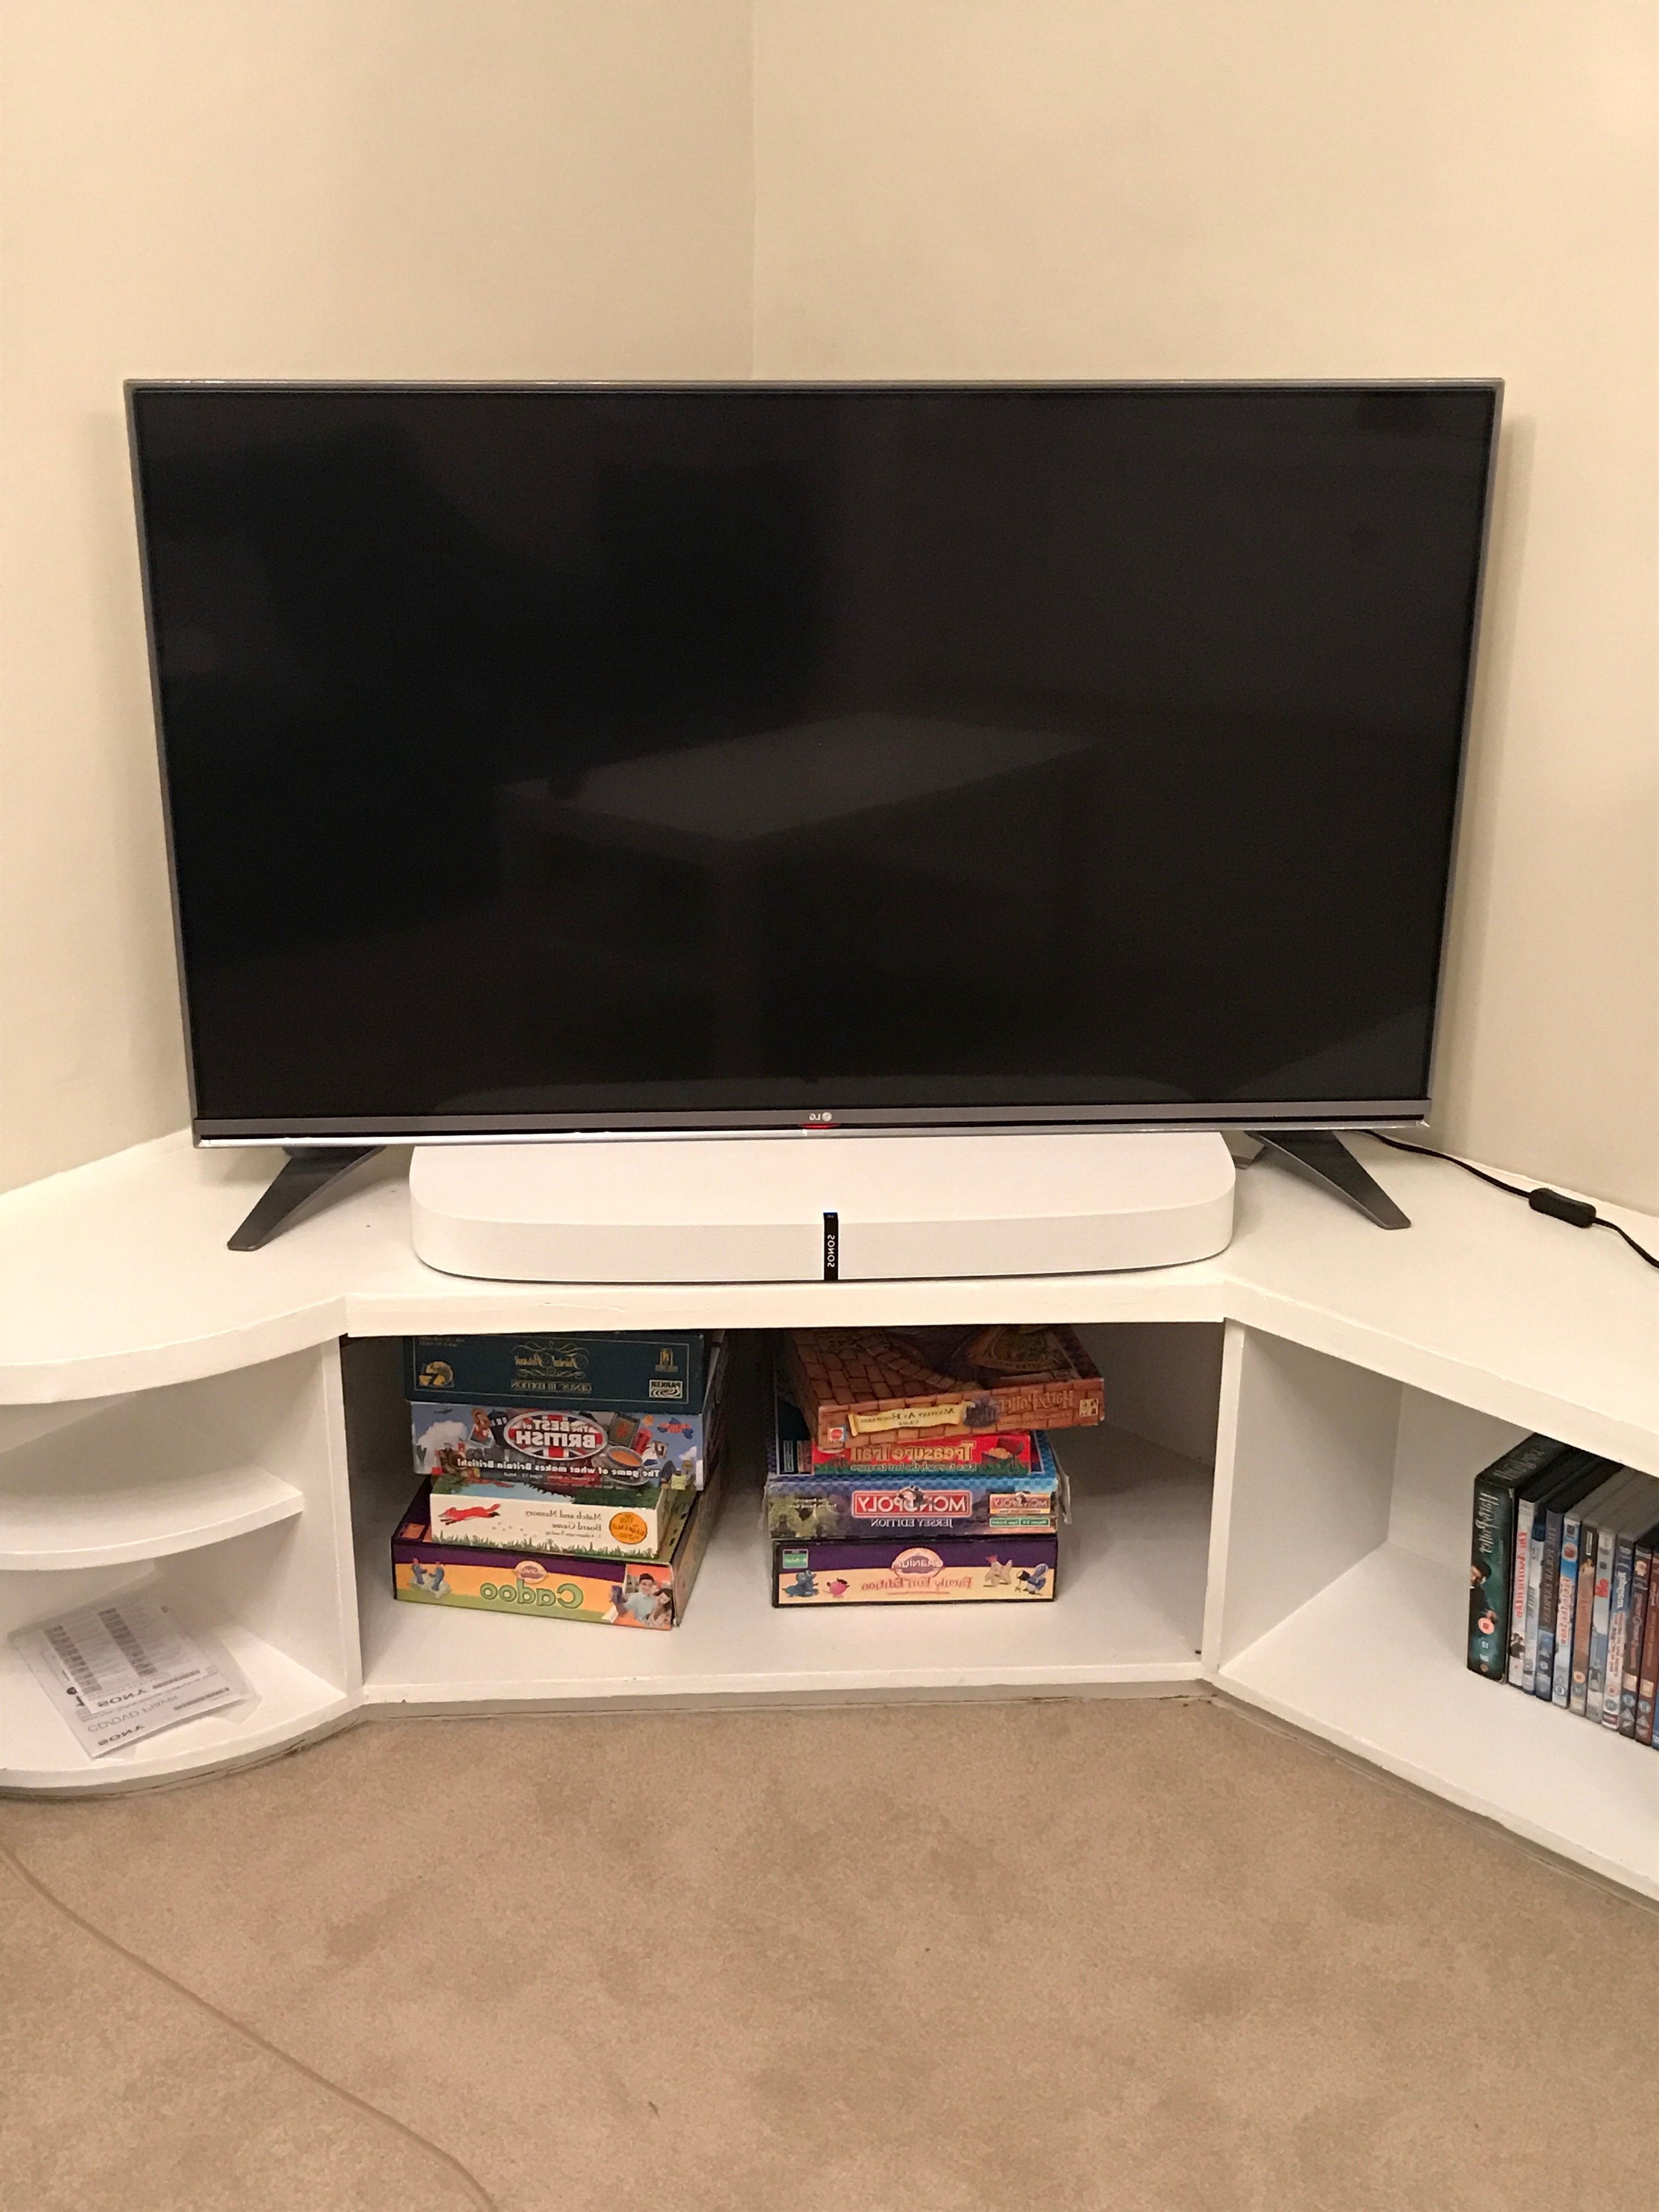 Sonos Tv Stands Within 2017 Photos Of Playbase On Tv With Outer Stands? (View 4 of 20)